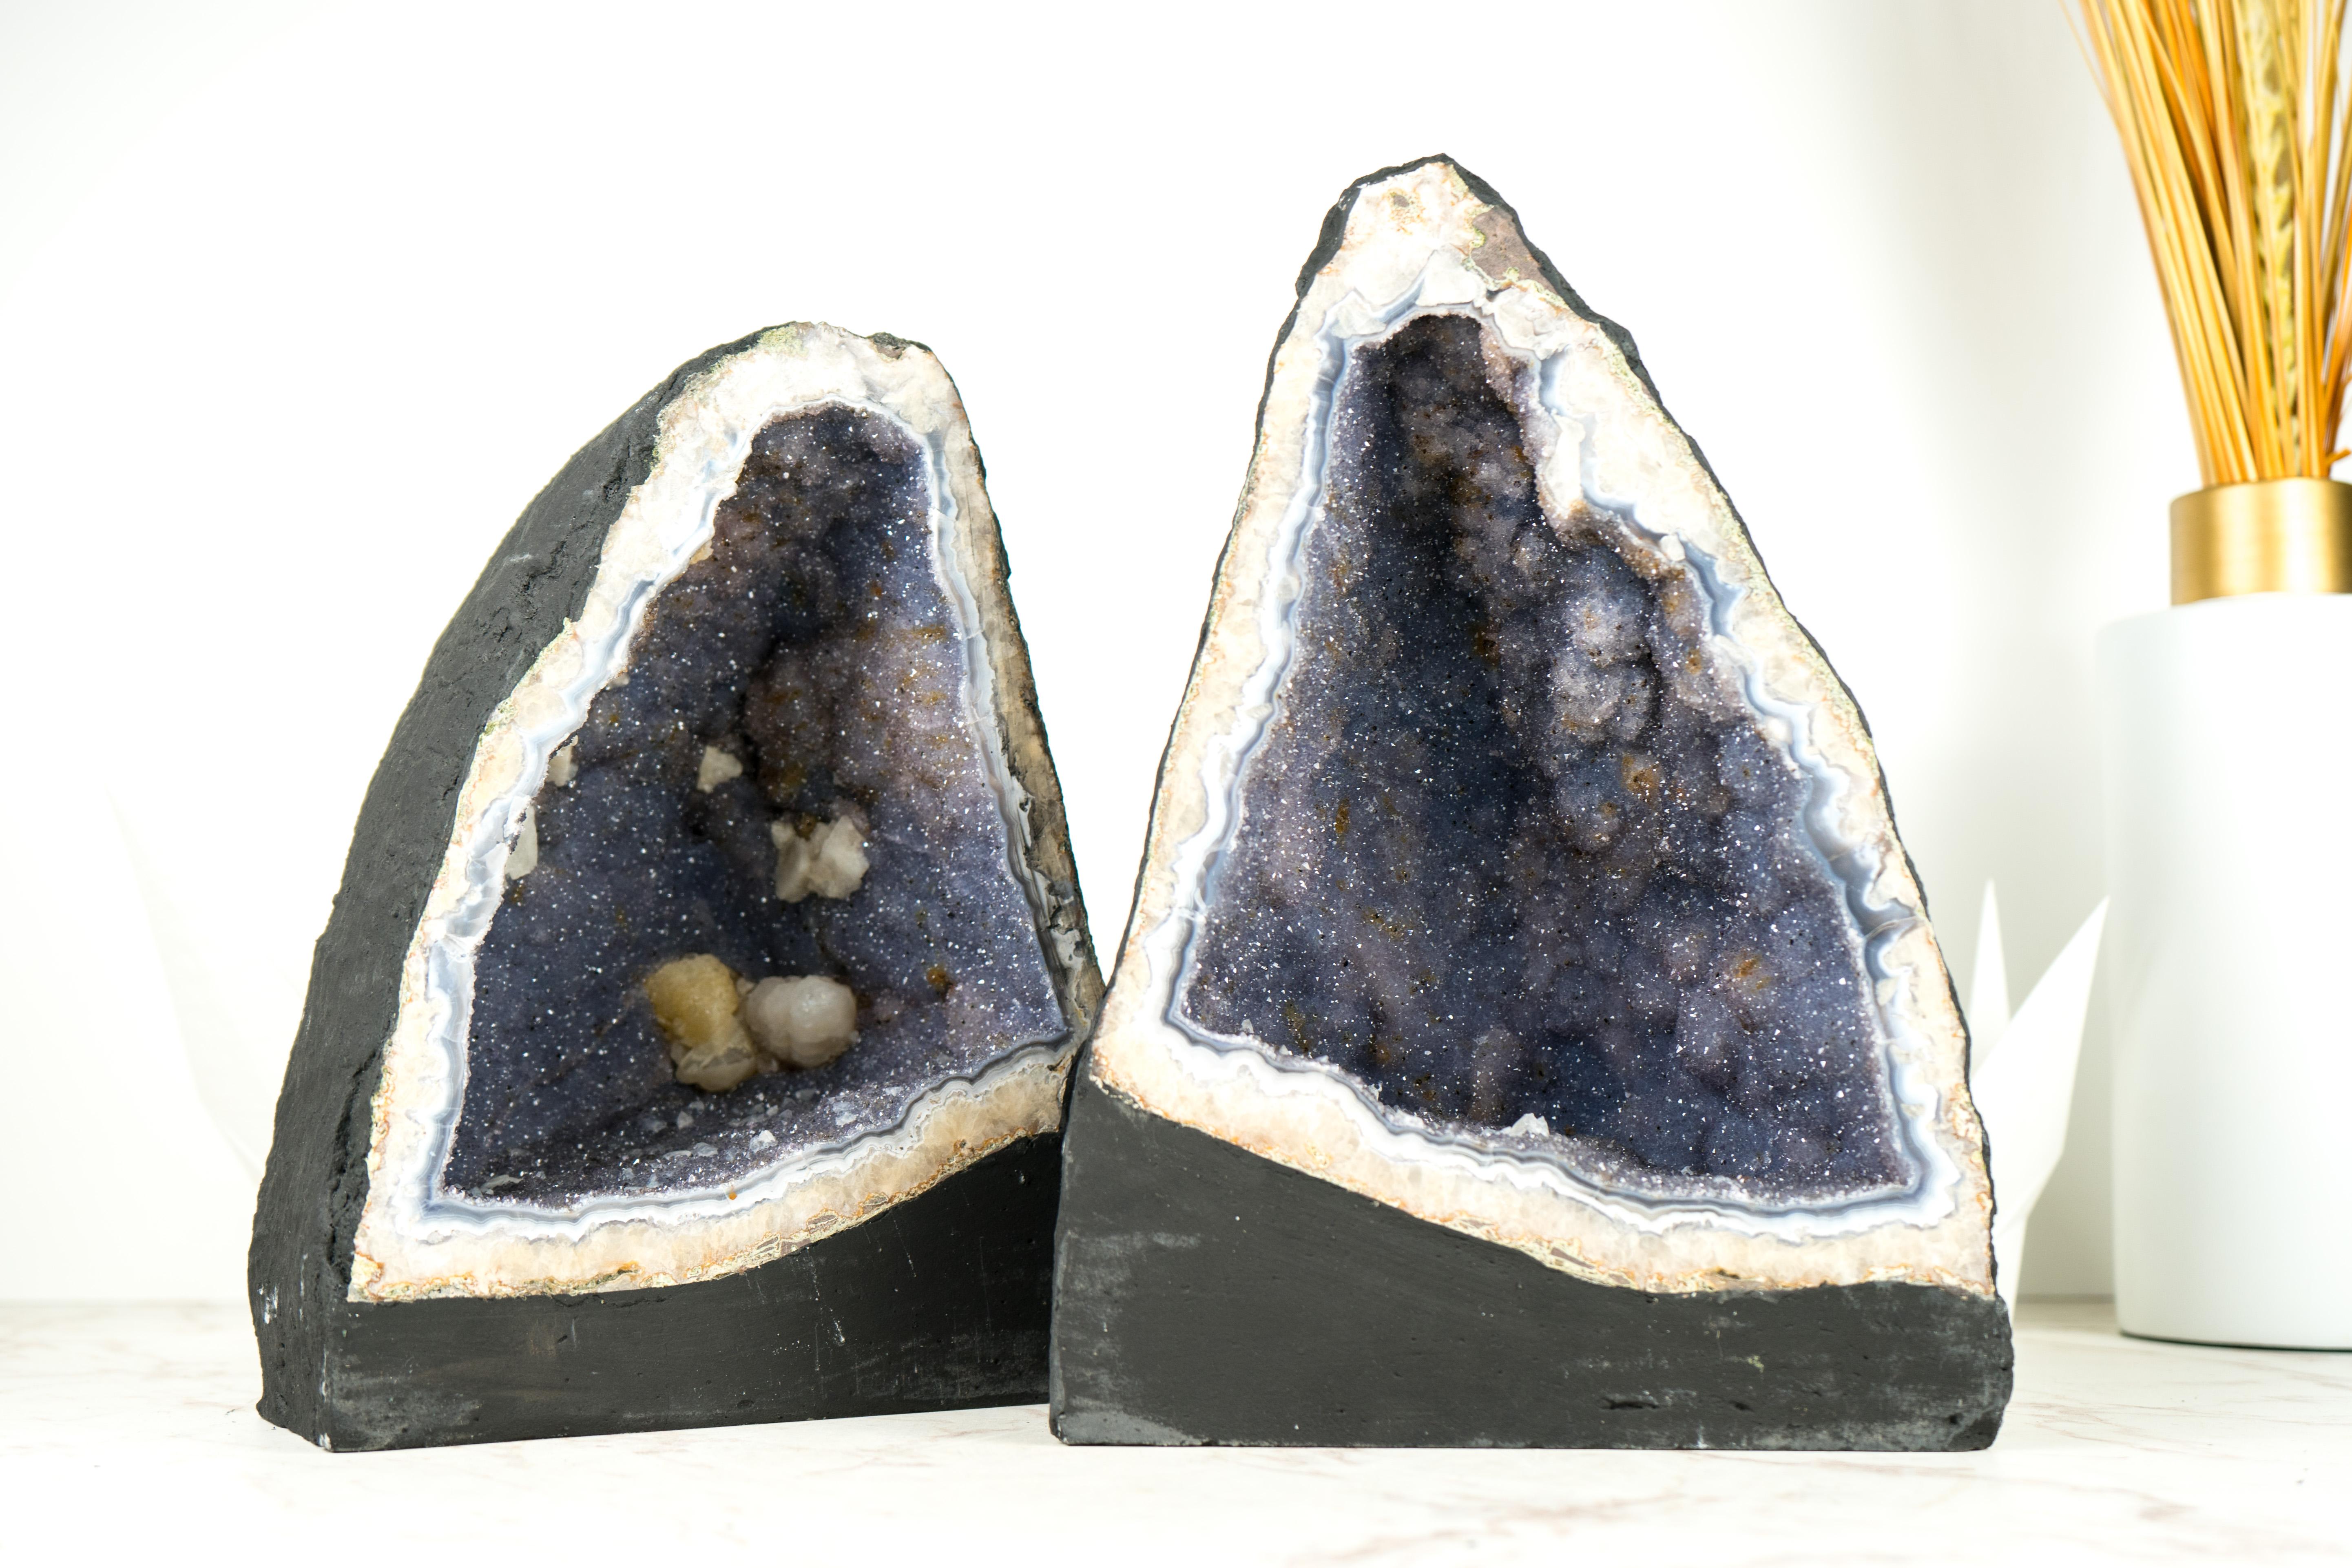 Pair of Blue Lace Agate Geodes with Lavender Amethyst Druzy, Rare Sparkly Geodes For Sale 7